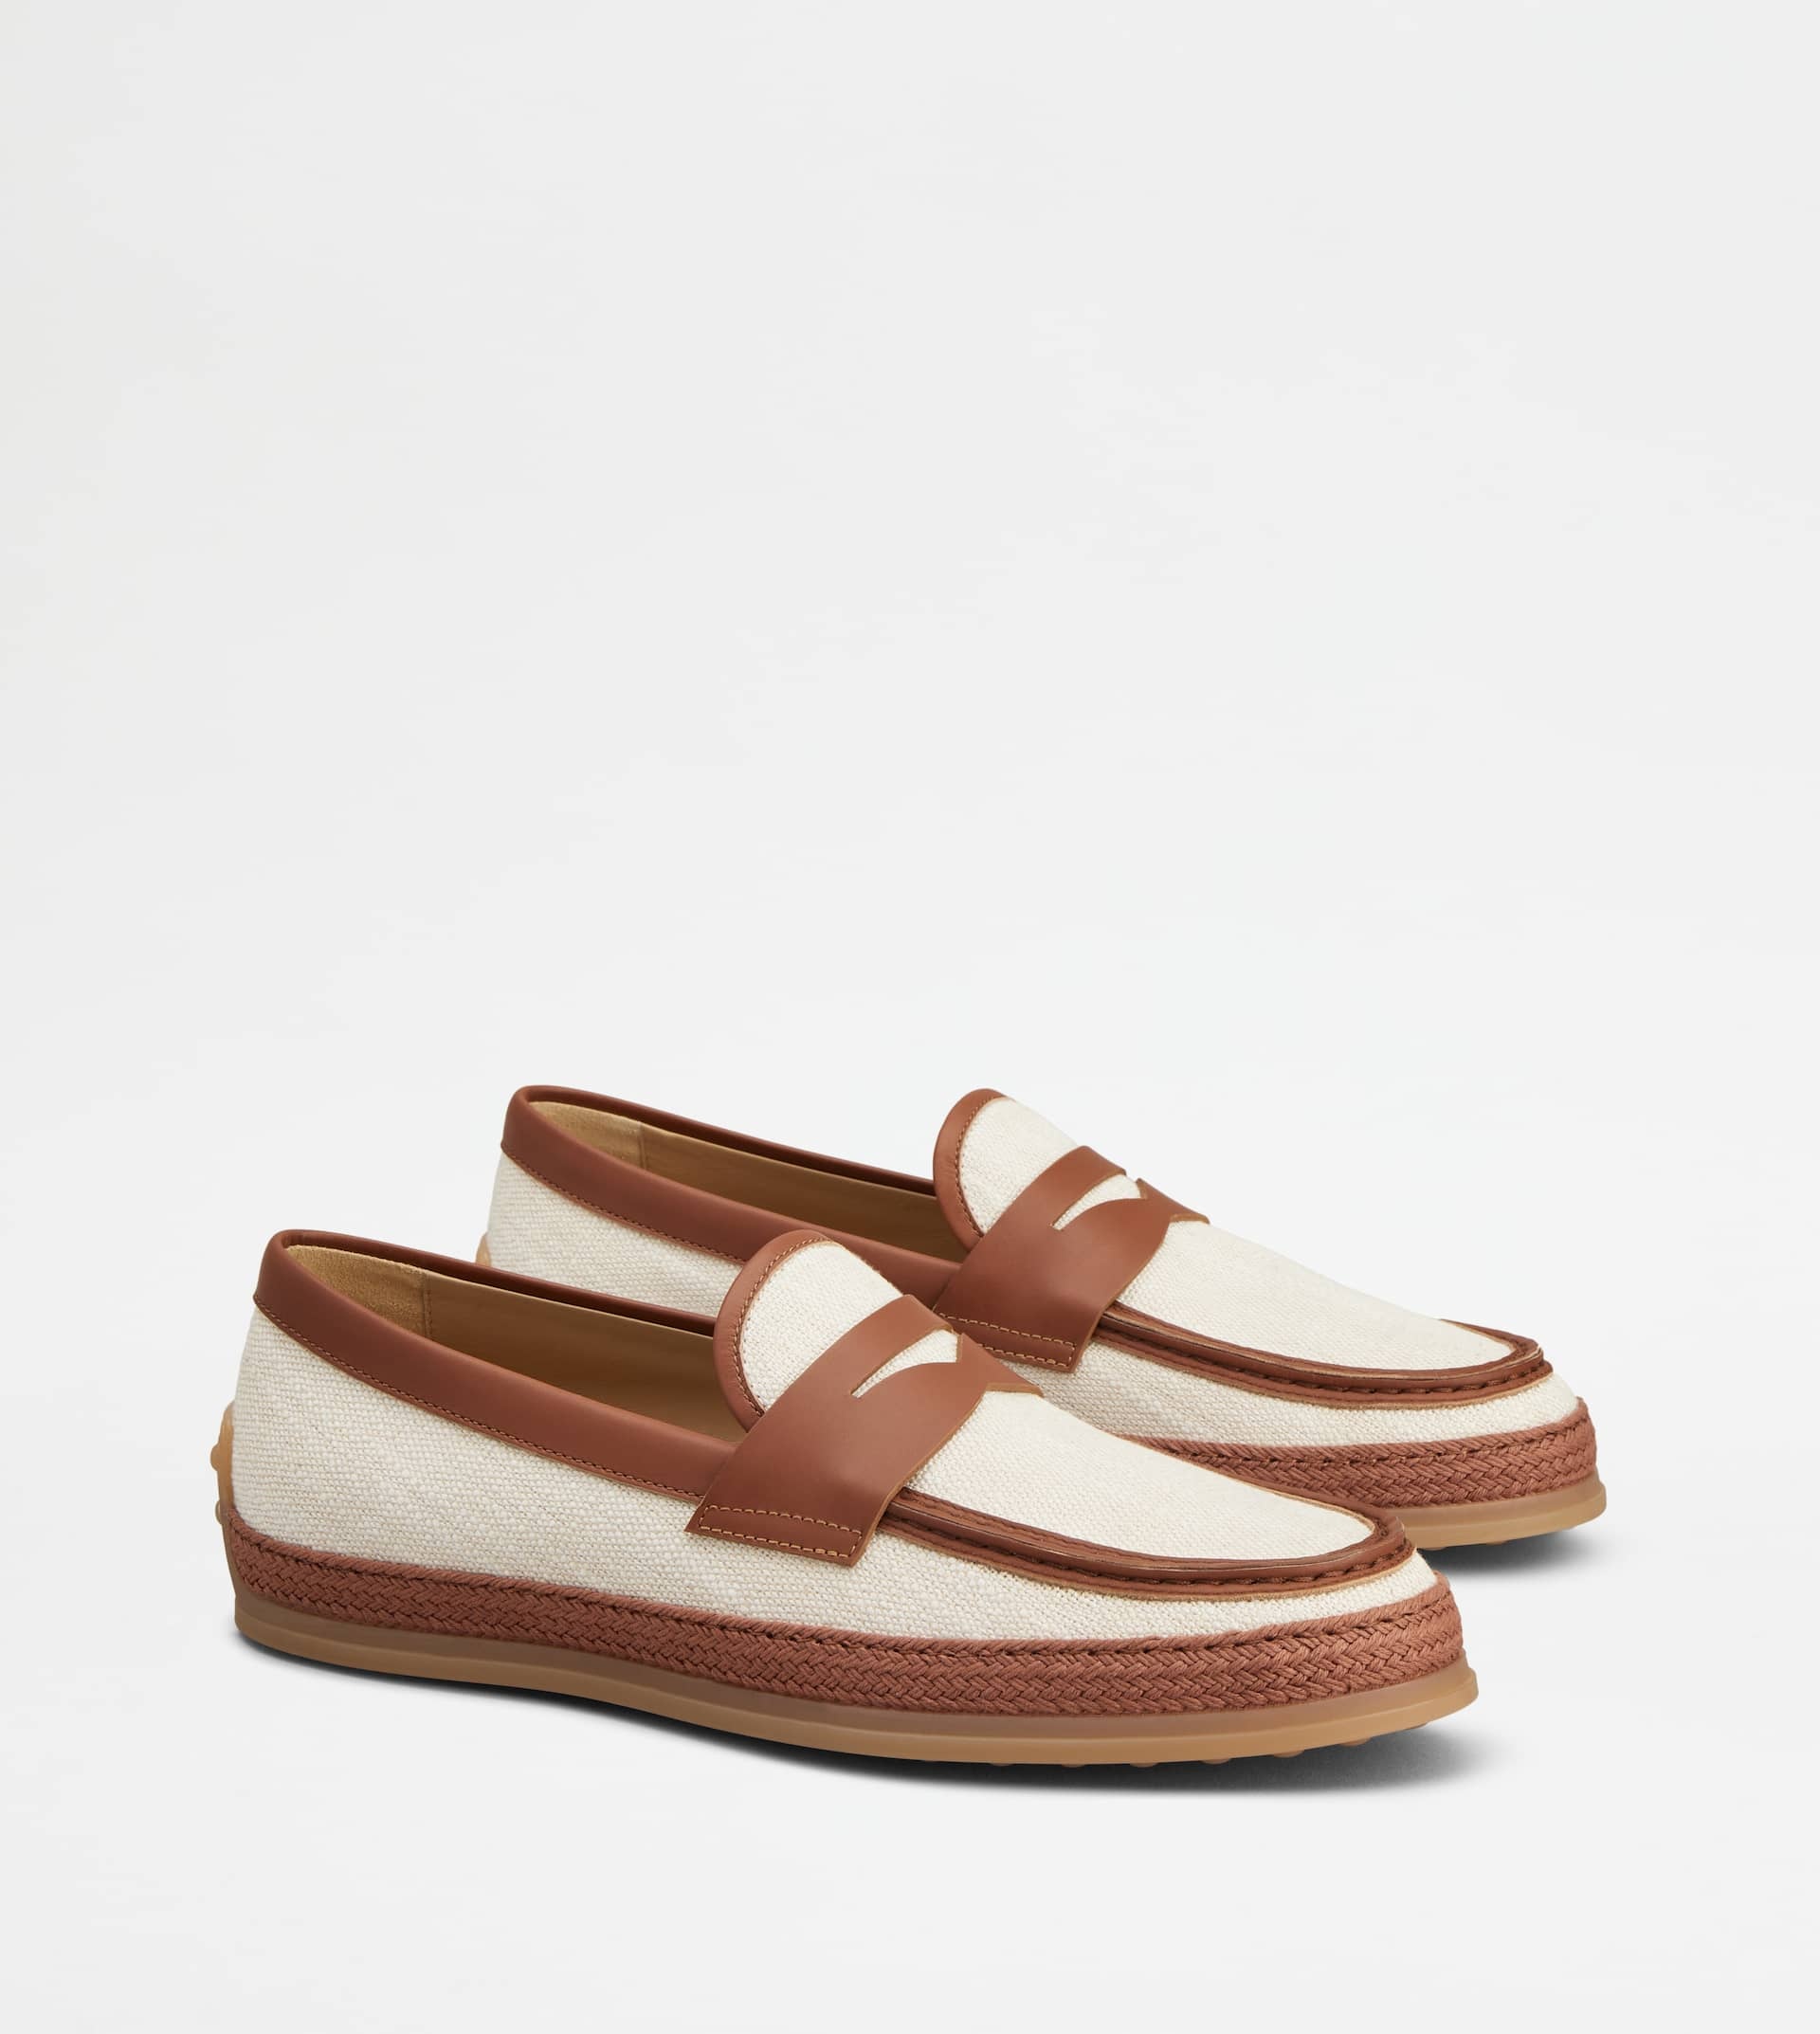 LOAFERS IN CANVAS AND LEATHER - OFF WHITE, BROWN - 3